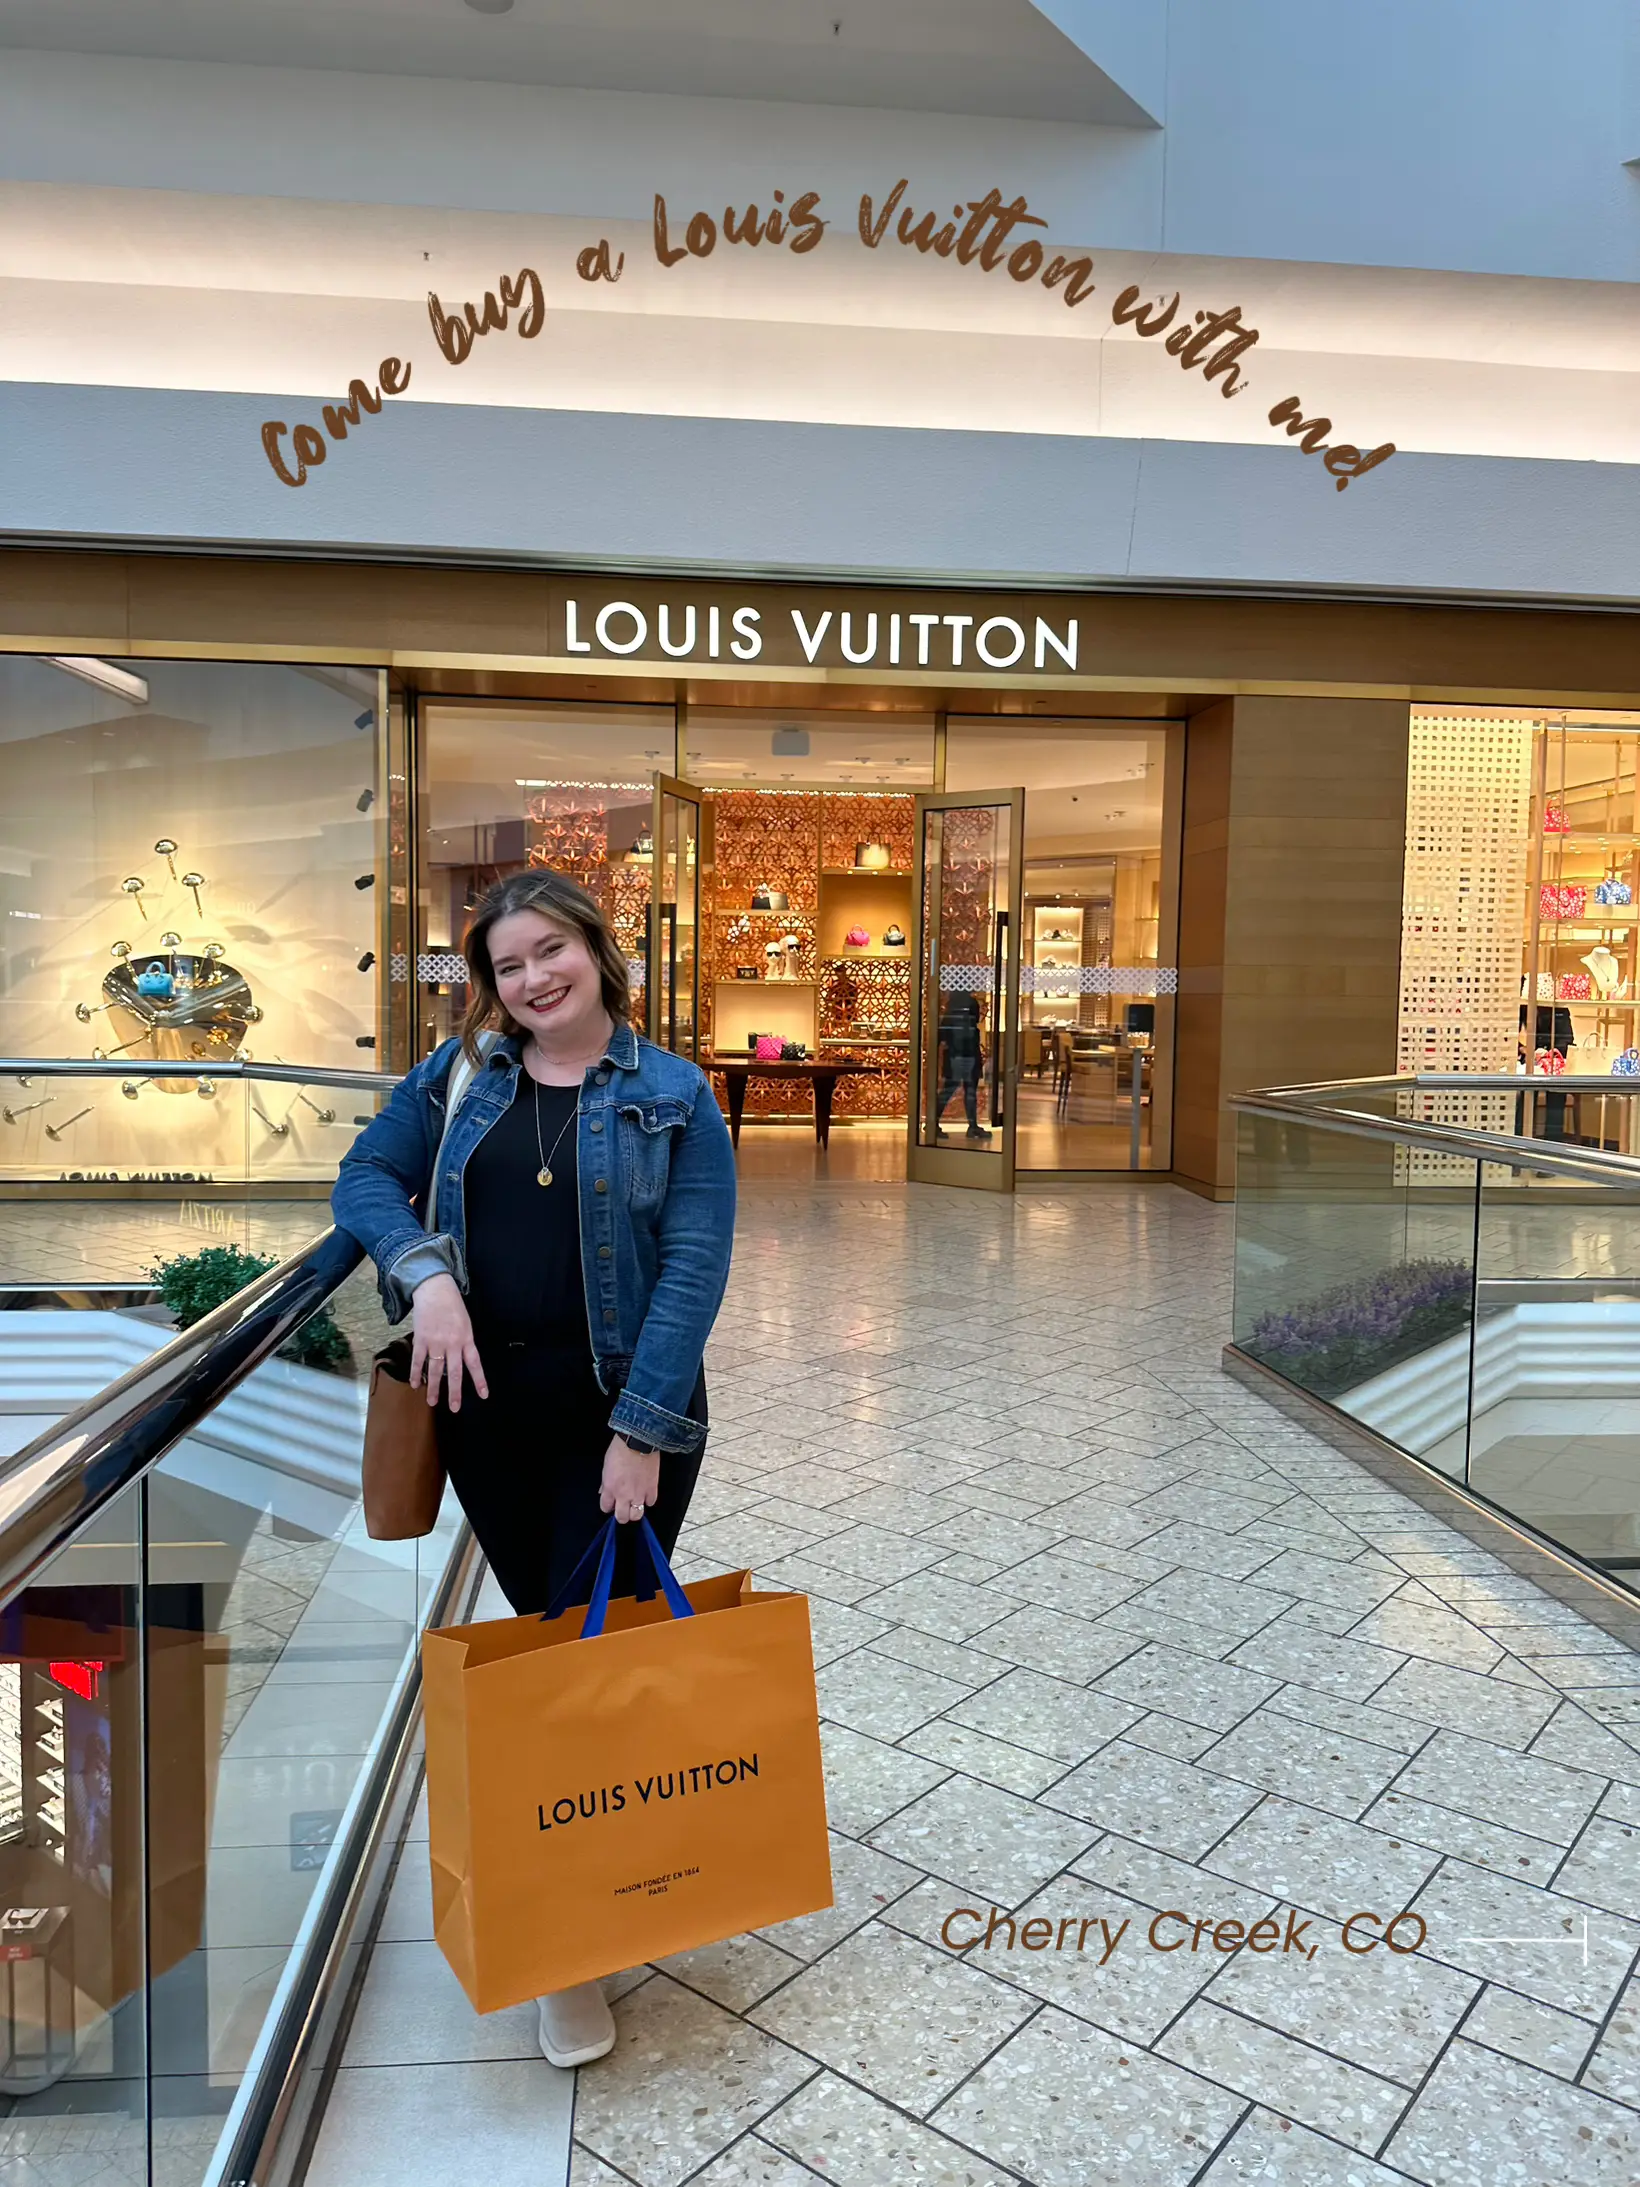 LV twist purse review and link in comment section : r/DHgate